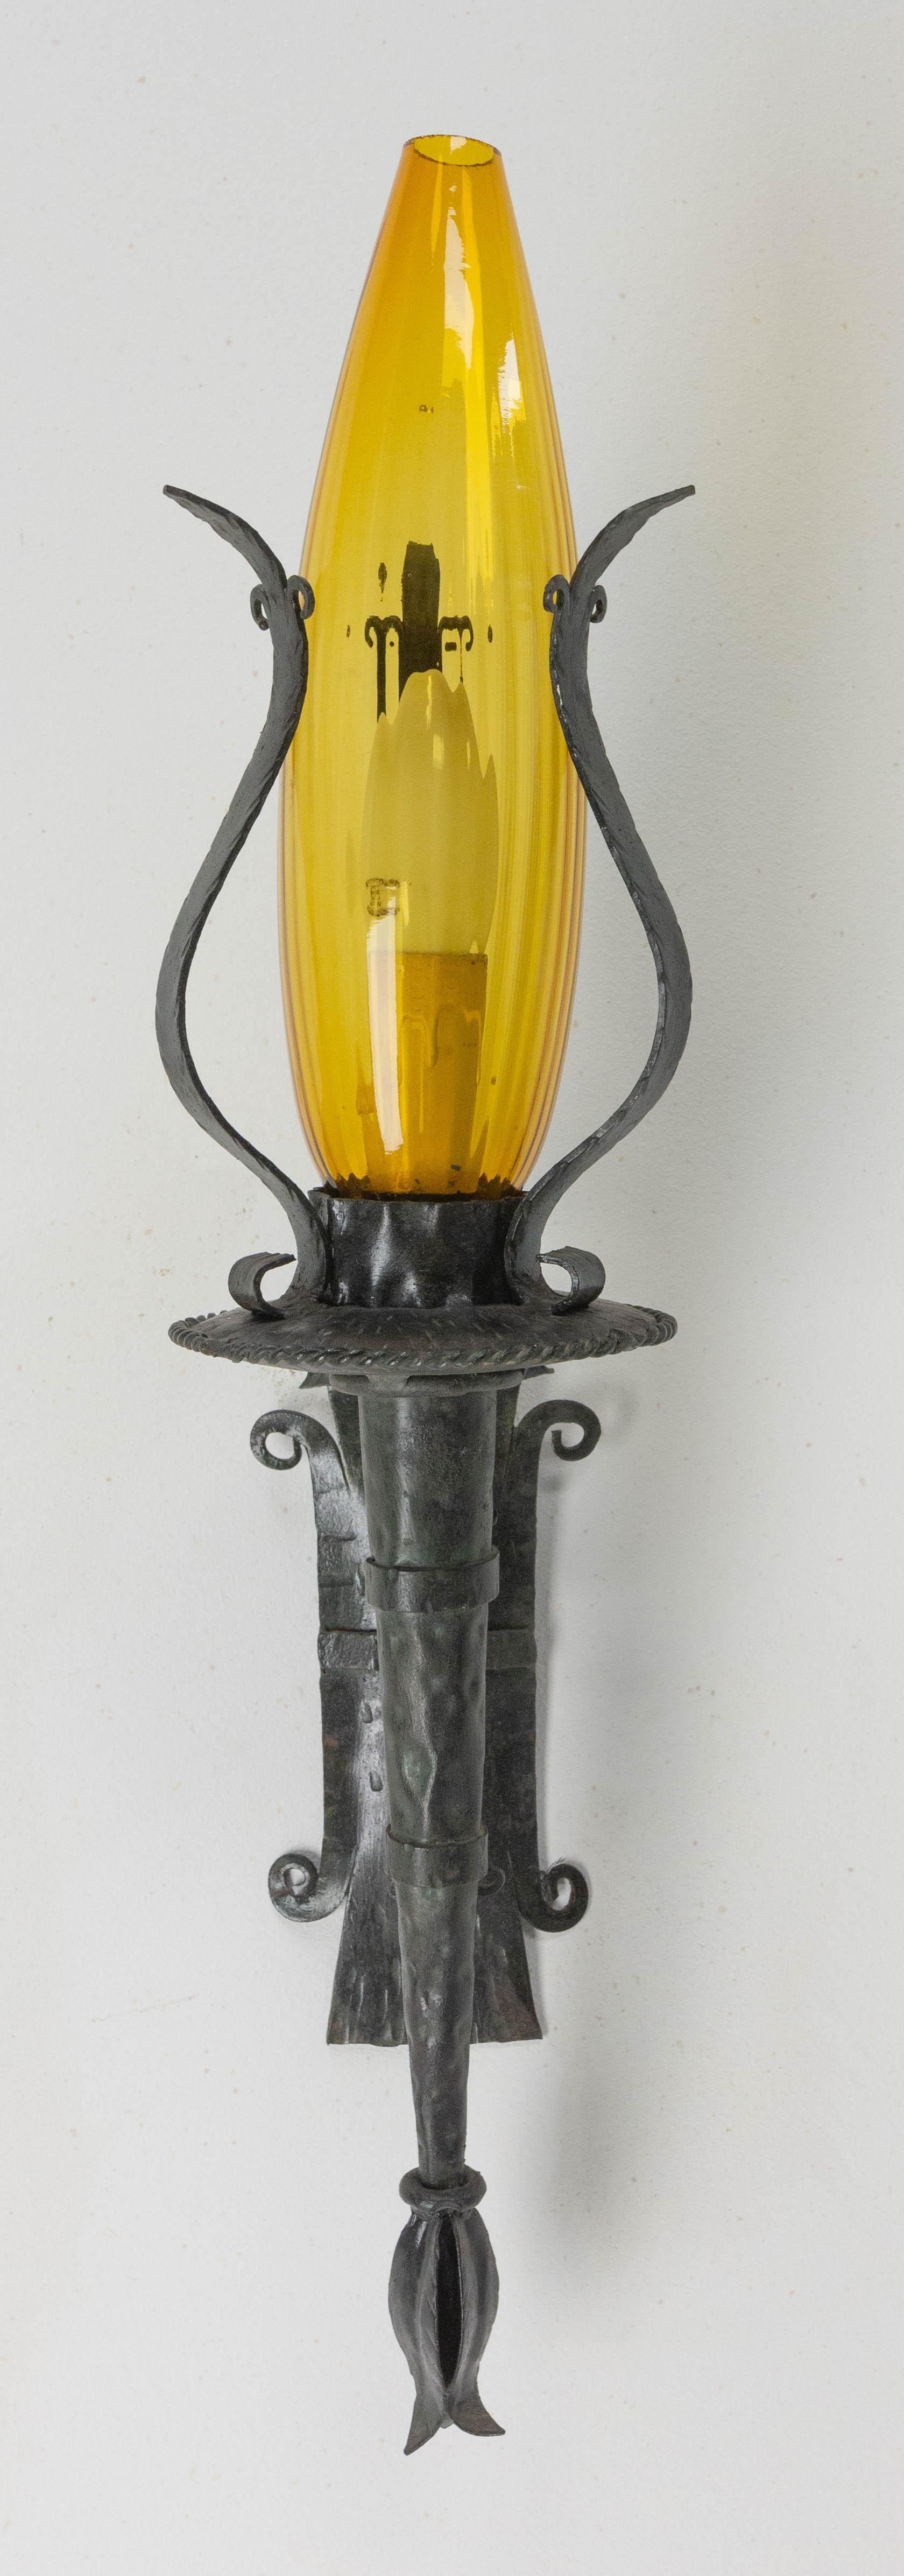 Outdoor Pair of Sconces Lanterns, Amber Glass and Wrought Iron, c. 1960, France In Good Condition For Sale In Labrit, Landes